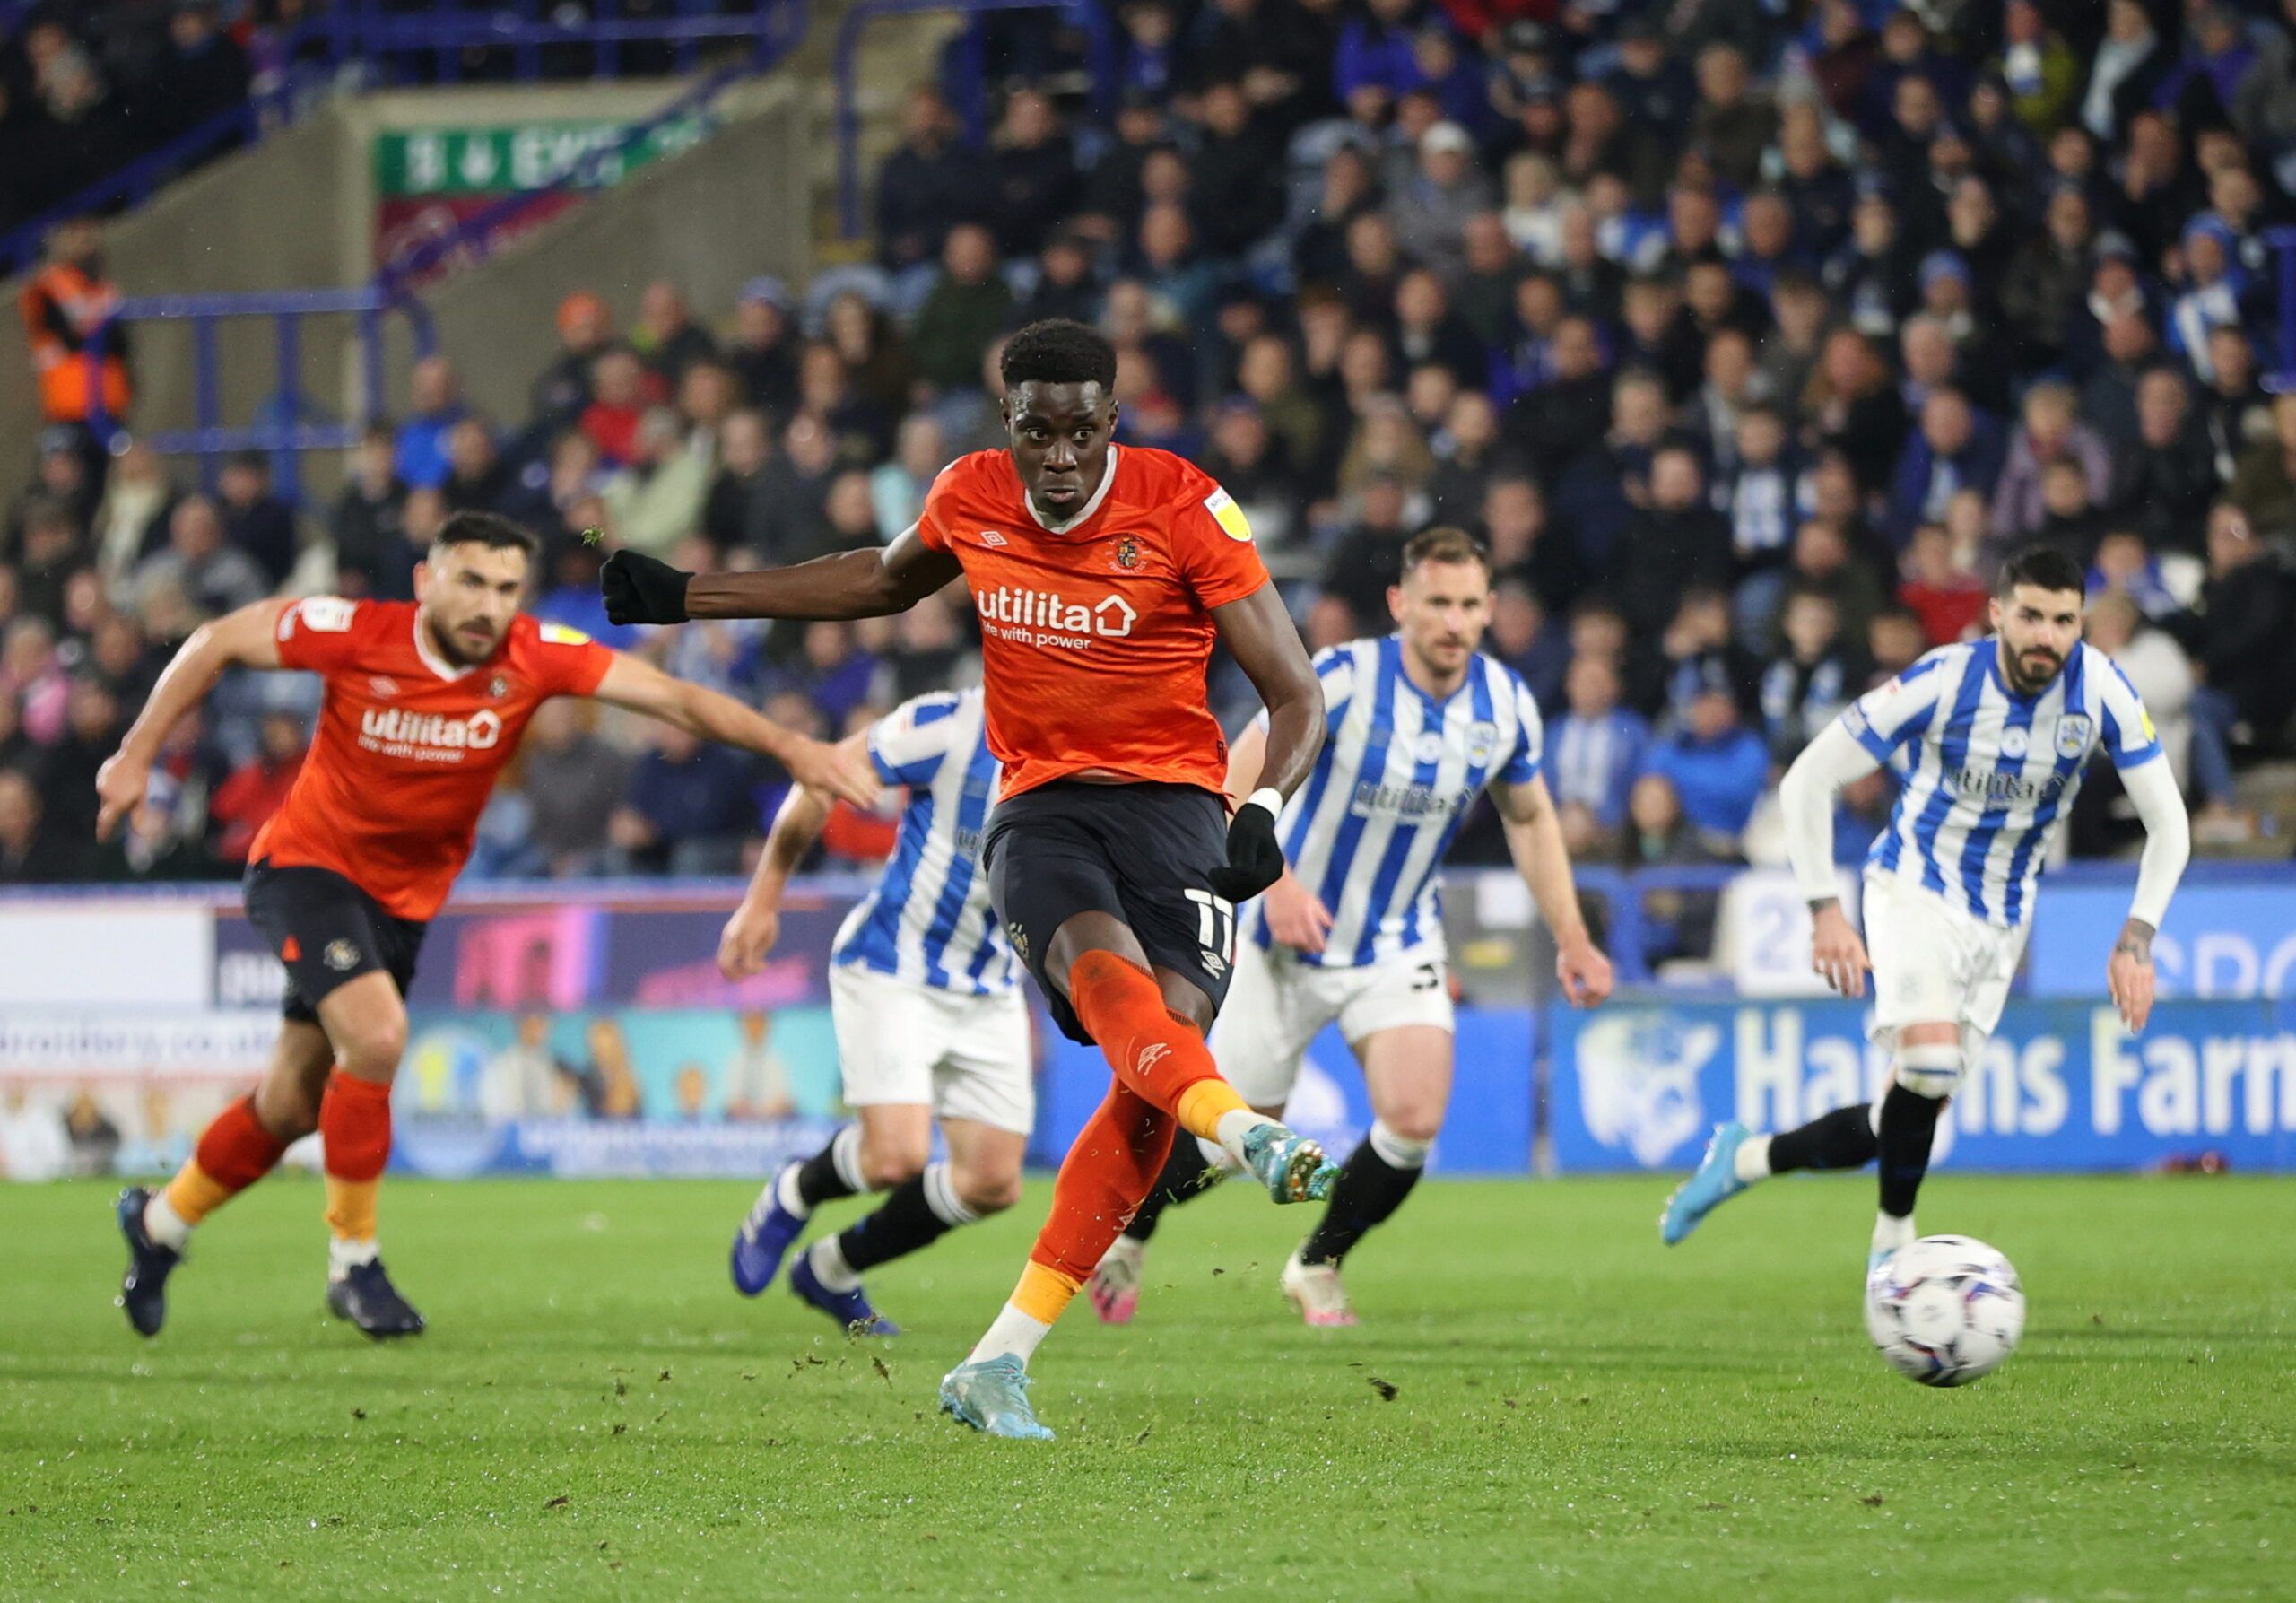 Soccer Football - Championship - Huddersfield Town v Luton Town - John Smith's Stadium, Huddersfield, Britain - April 11, 2022 Luton Town's Elijah Adebayo shoots at goal and misses from the penalty spot  Action Images/Molly Darlington  EDITORIAL USE ONLY. No use with unauthorized audio, video, data, fixture lists, club/league logos or 